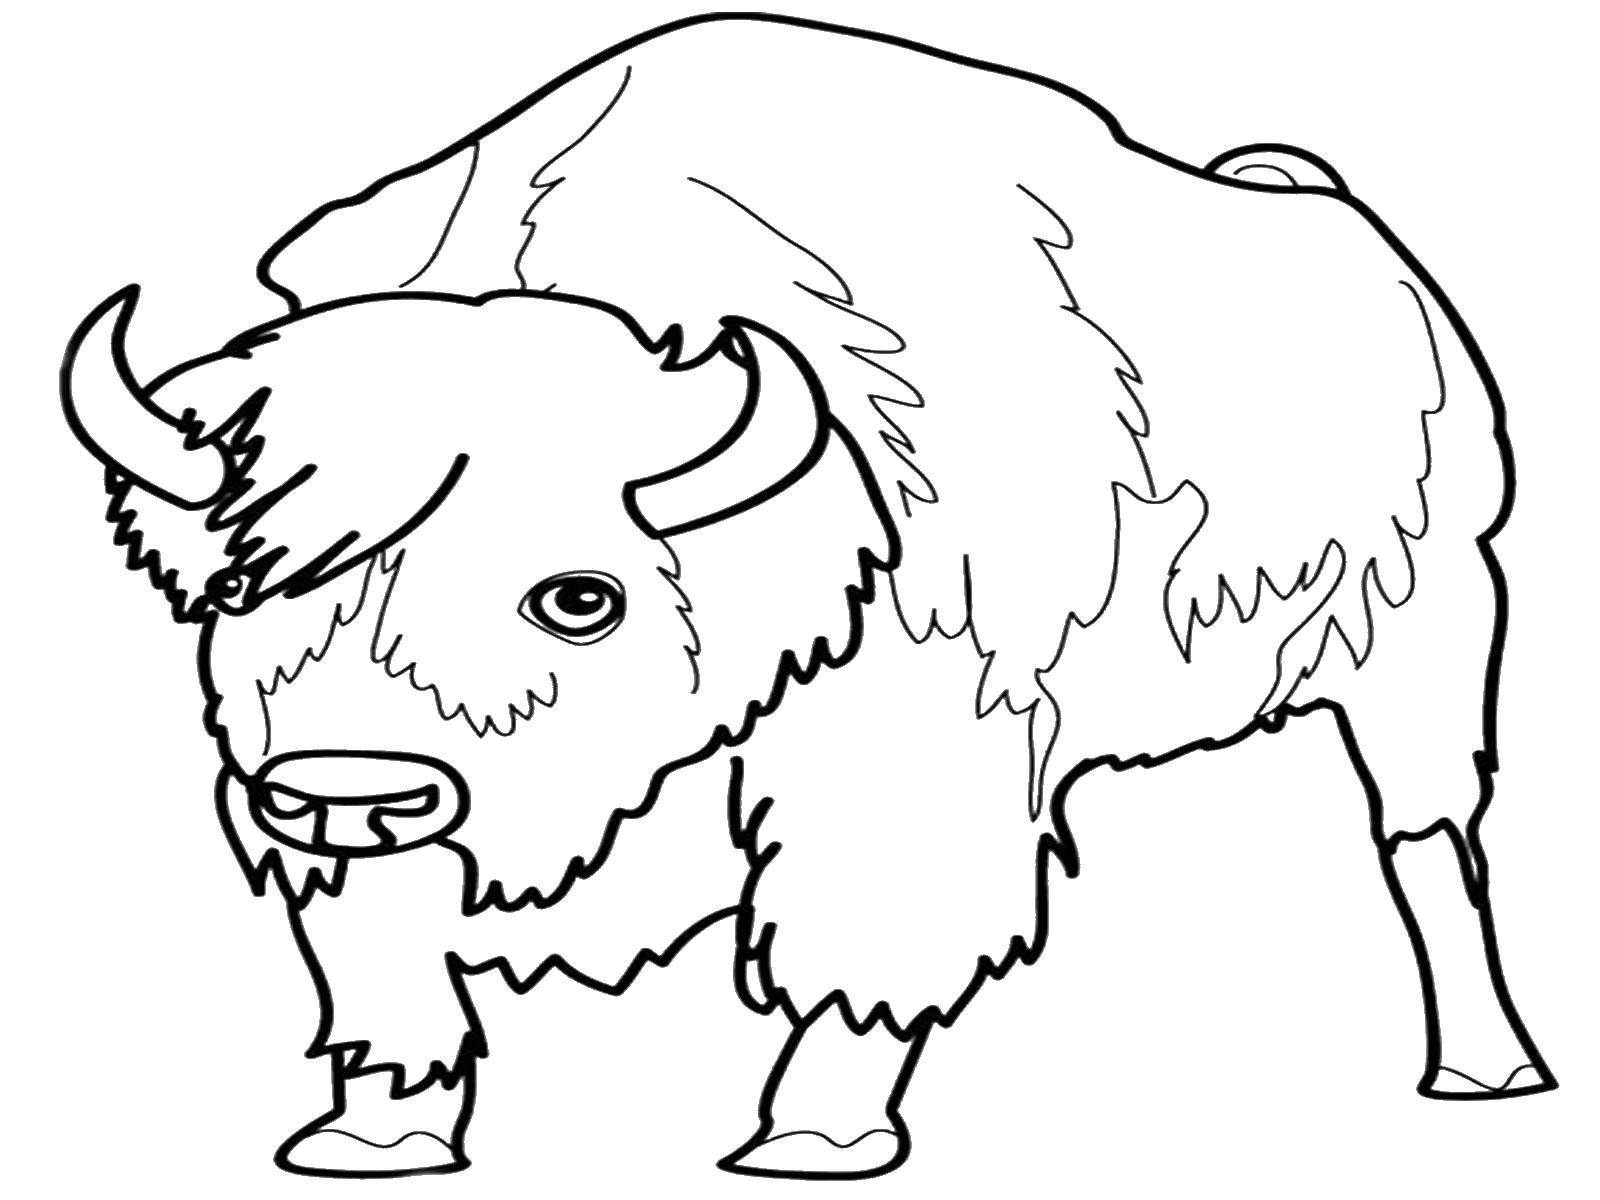 Coloring Bull. Category Animals. Tags:  Animals, bull.